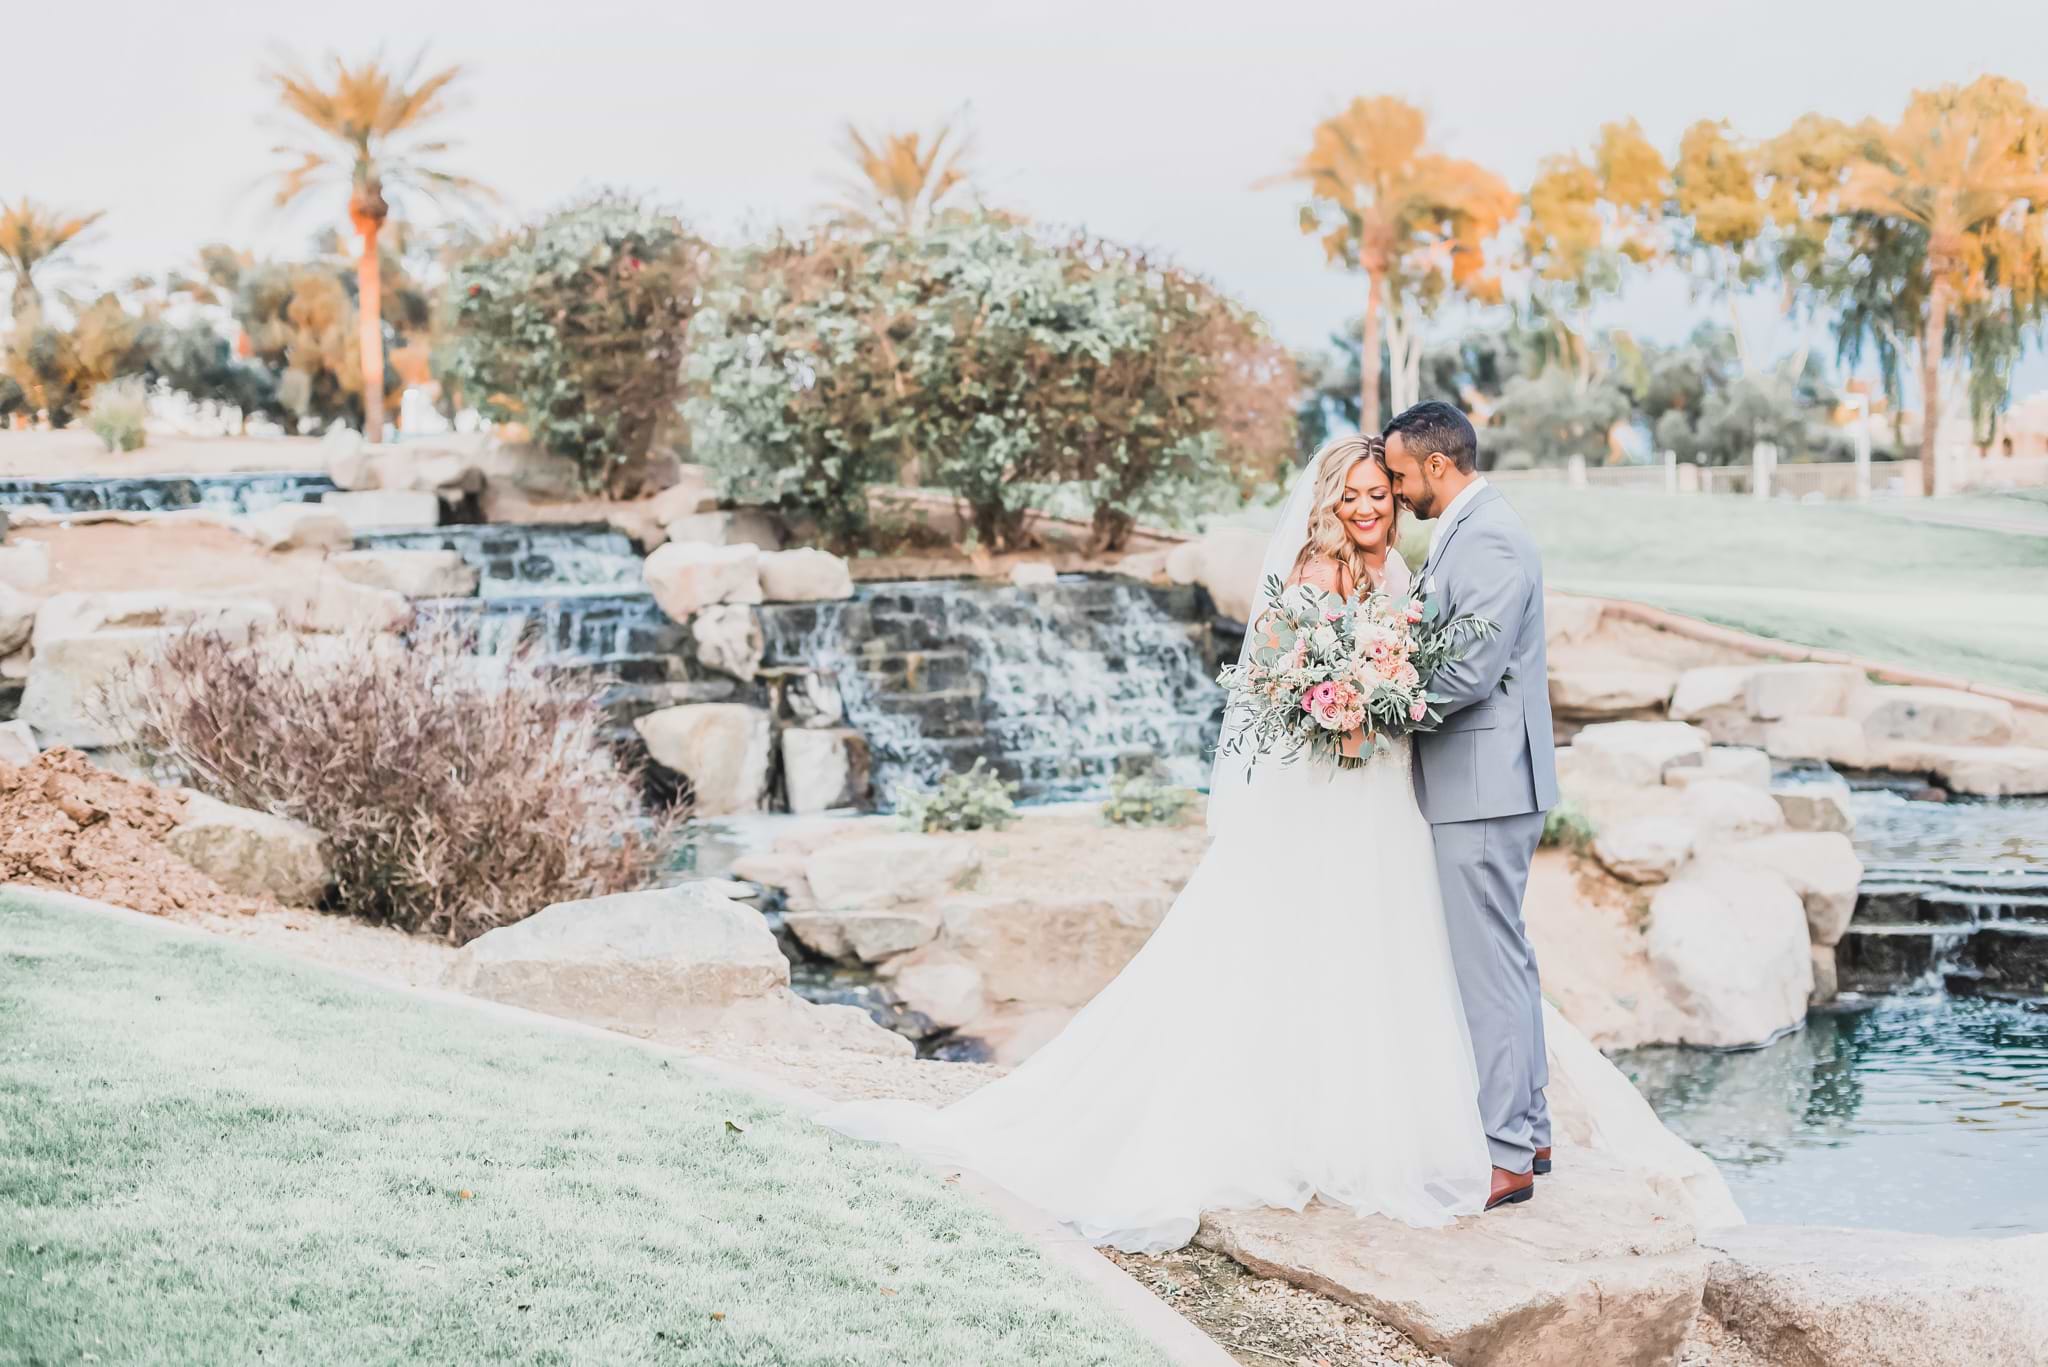 Ocotillo Oasis by Wedgewood Weddings offers many gorgeous photo opportunities!